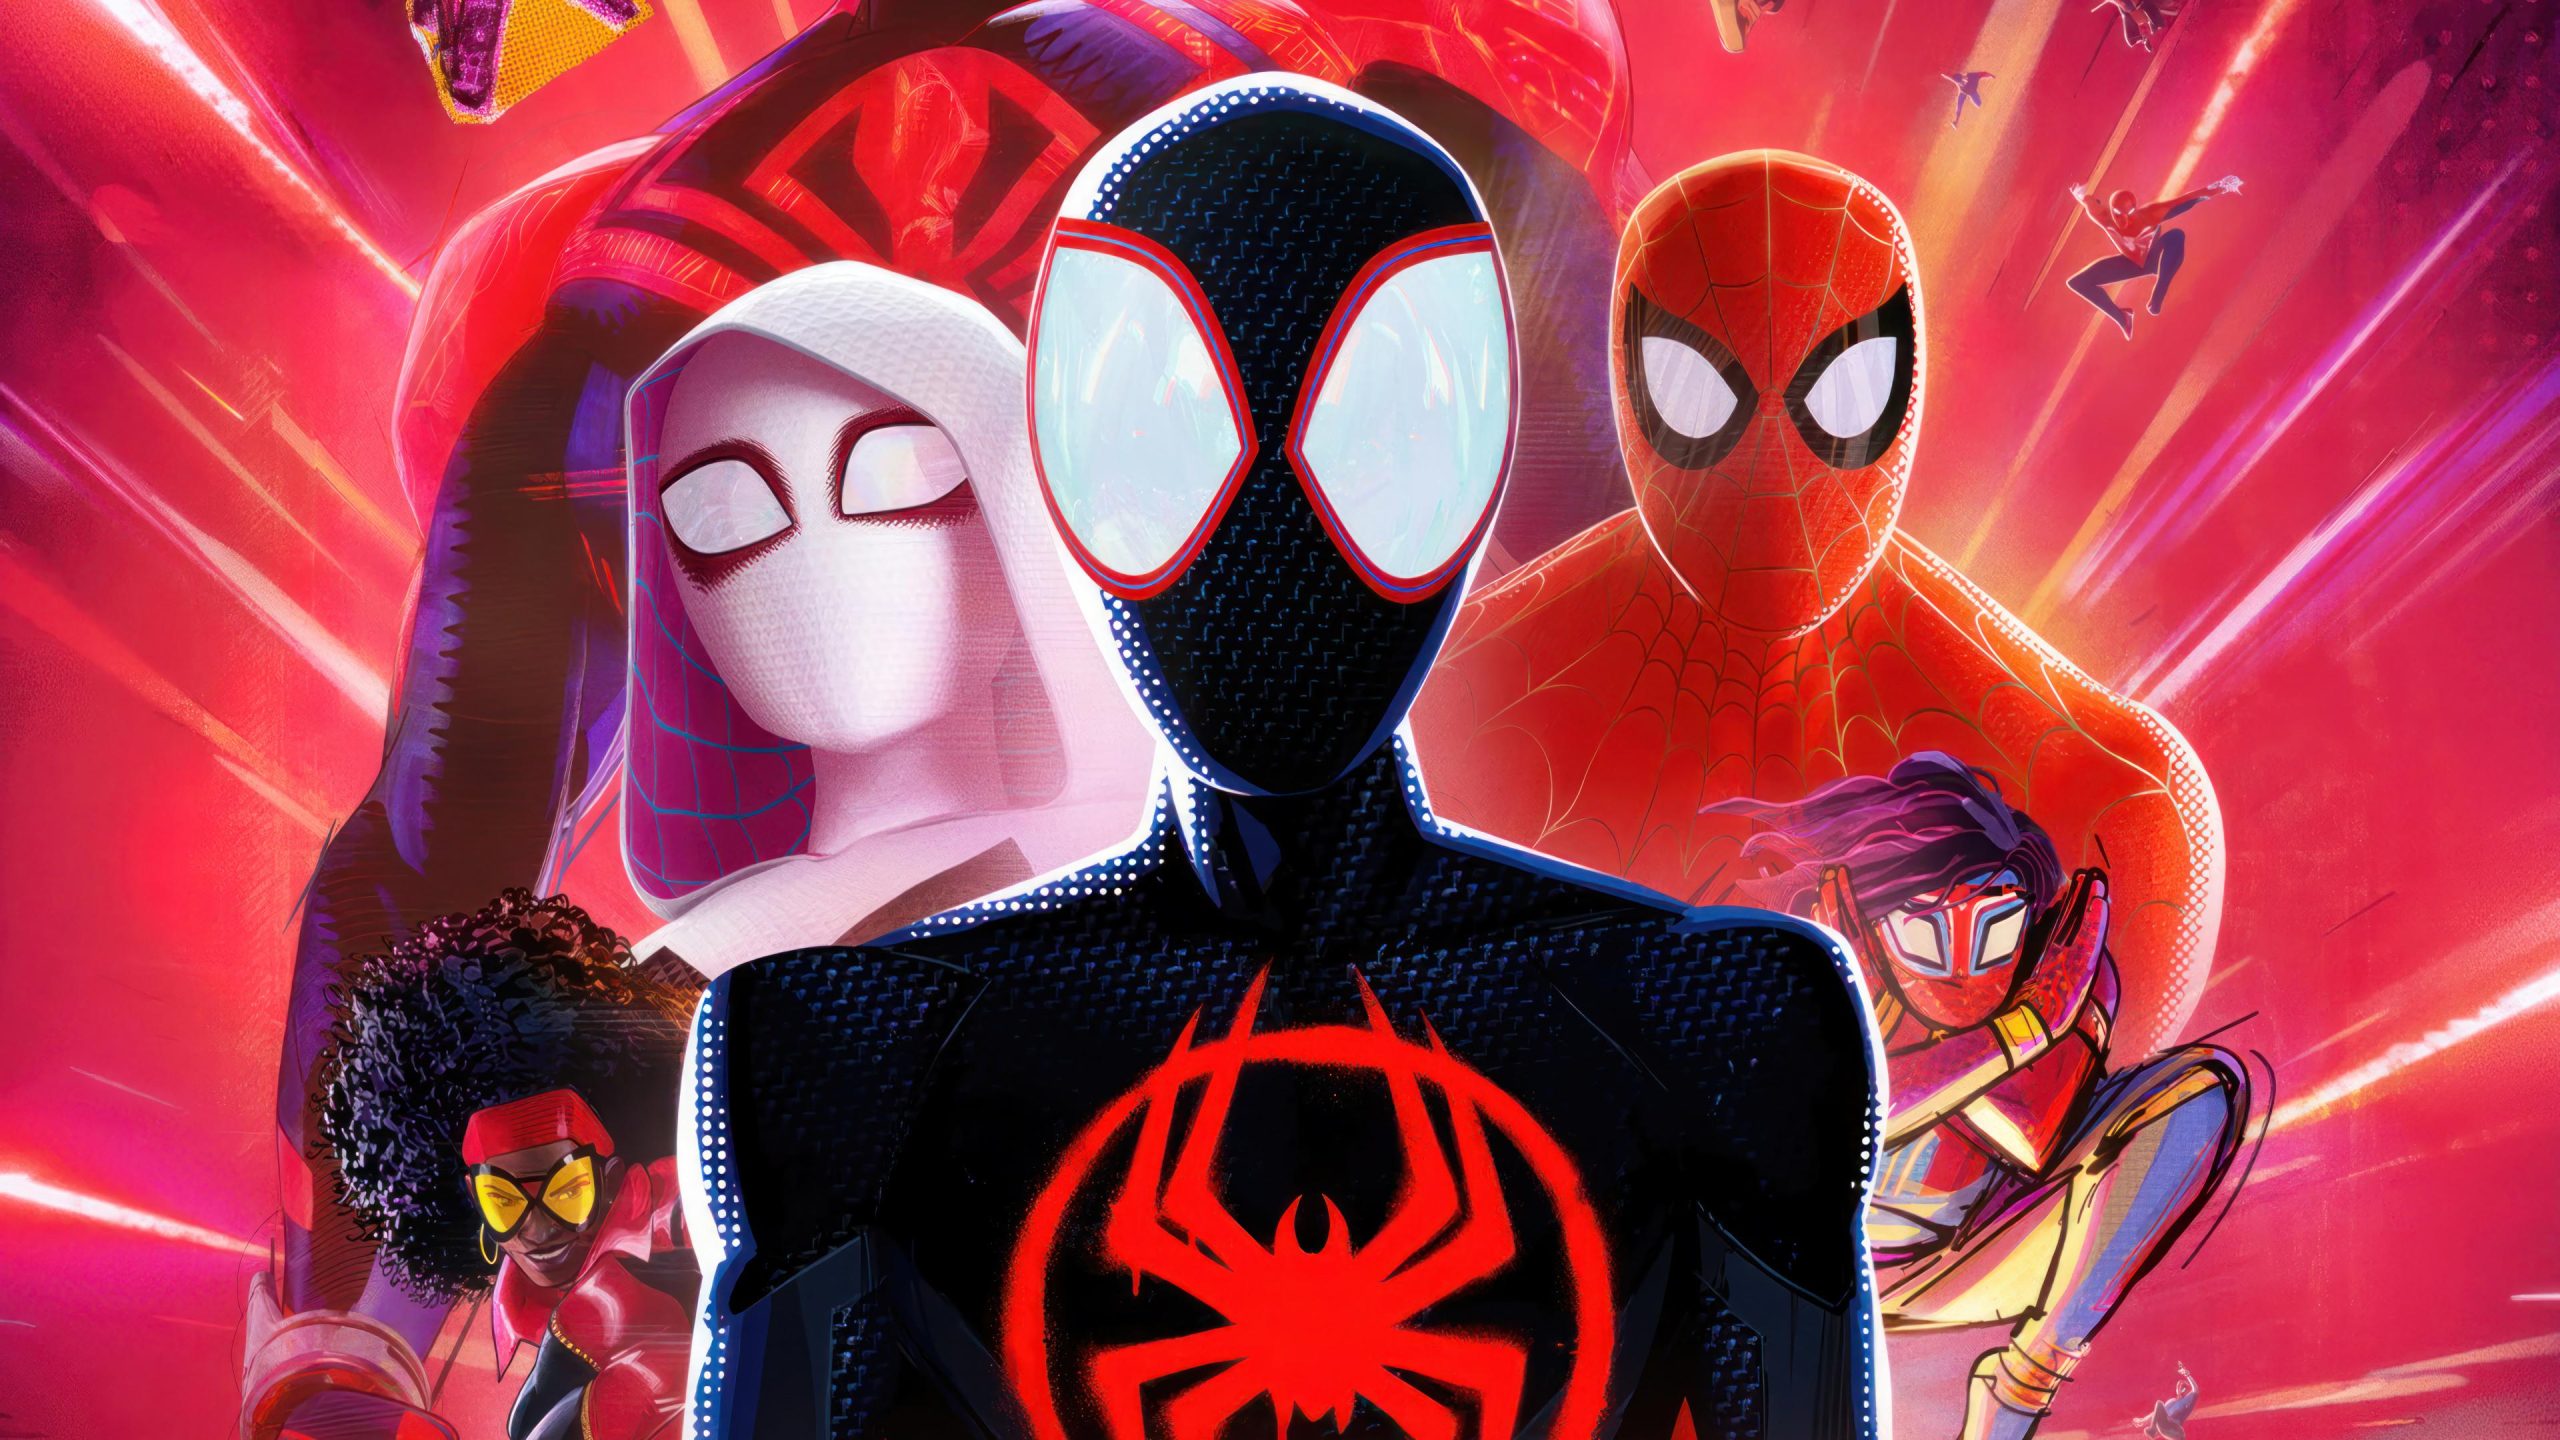 Miles Morales Spider-Man Across The Spider-Verse Wallpaper For Ipad, Miles Morales Spider-Man Across The Spider-Verse, Movies